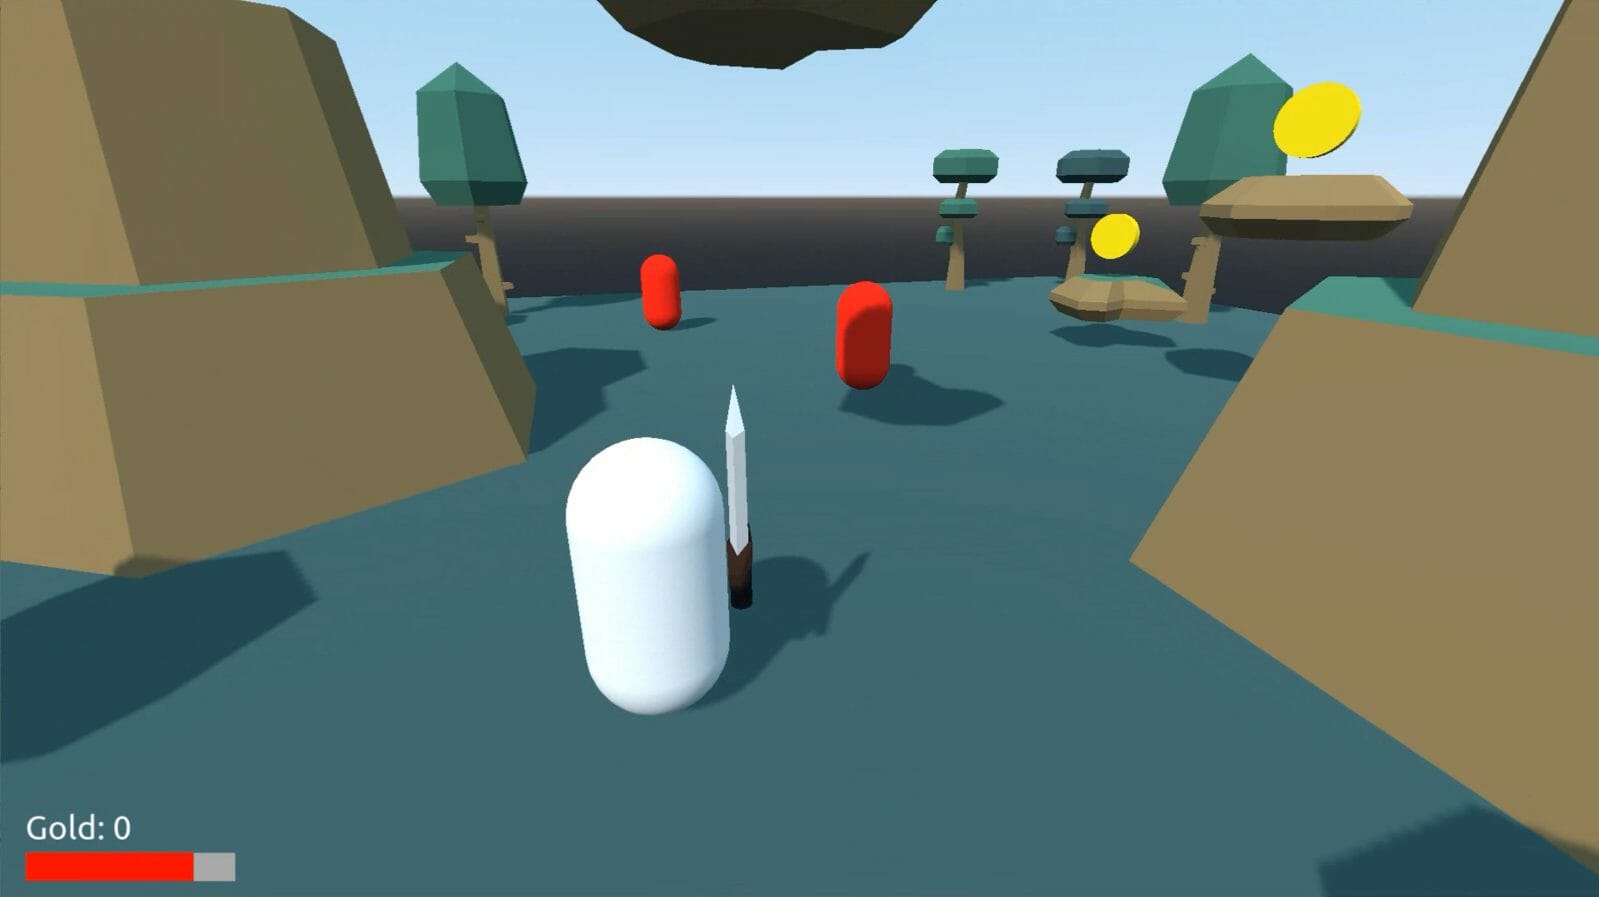 Screenshot of a simple Action RPG made with the Godot Engine